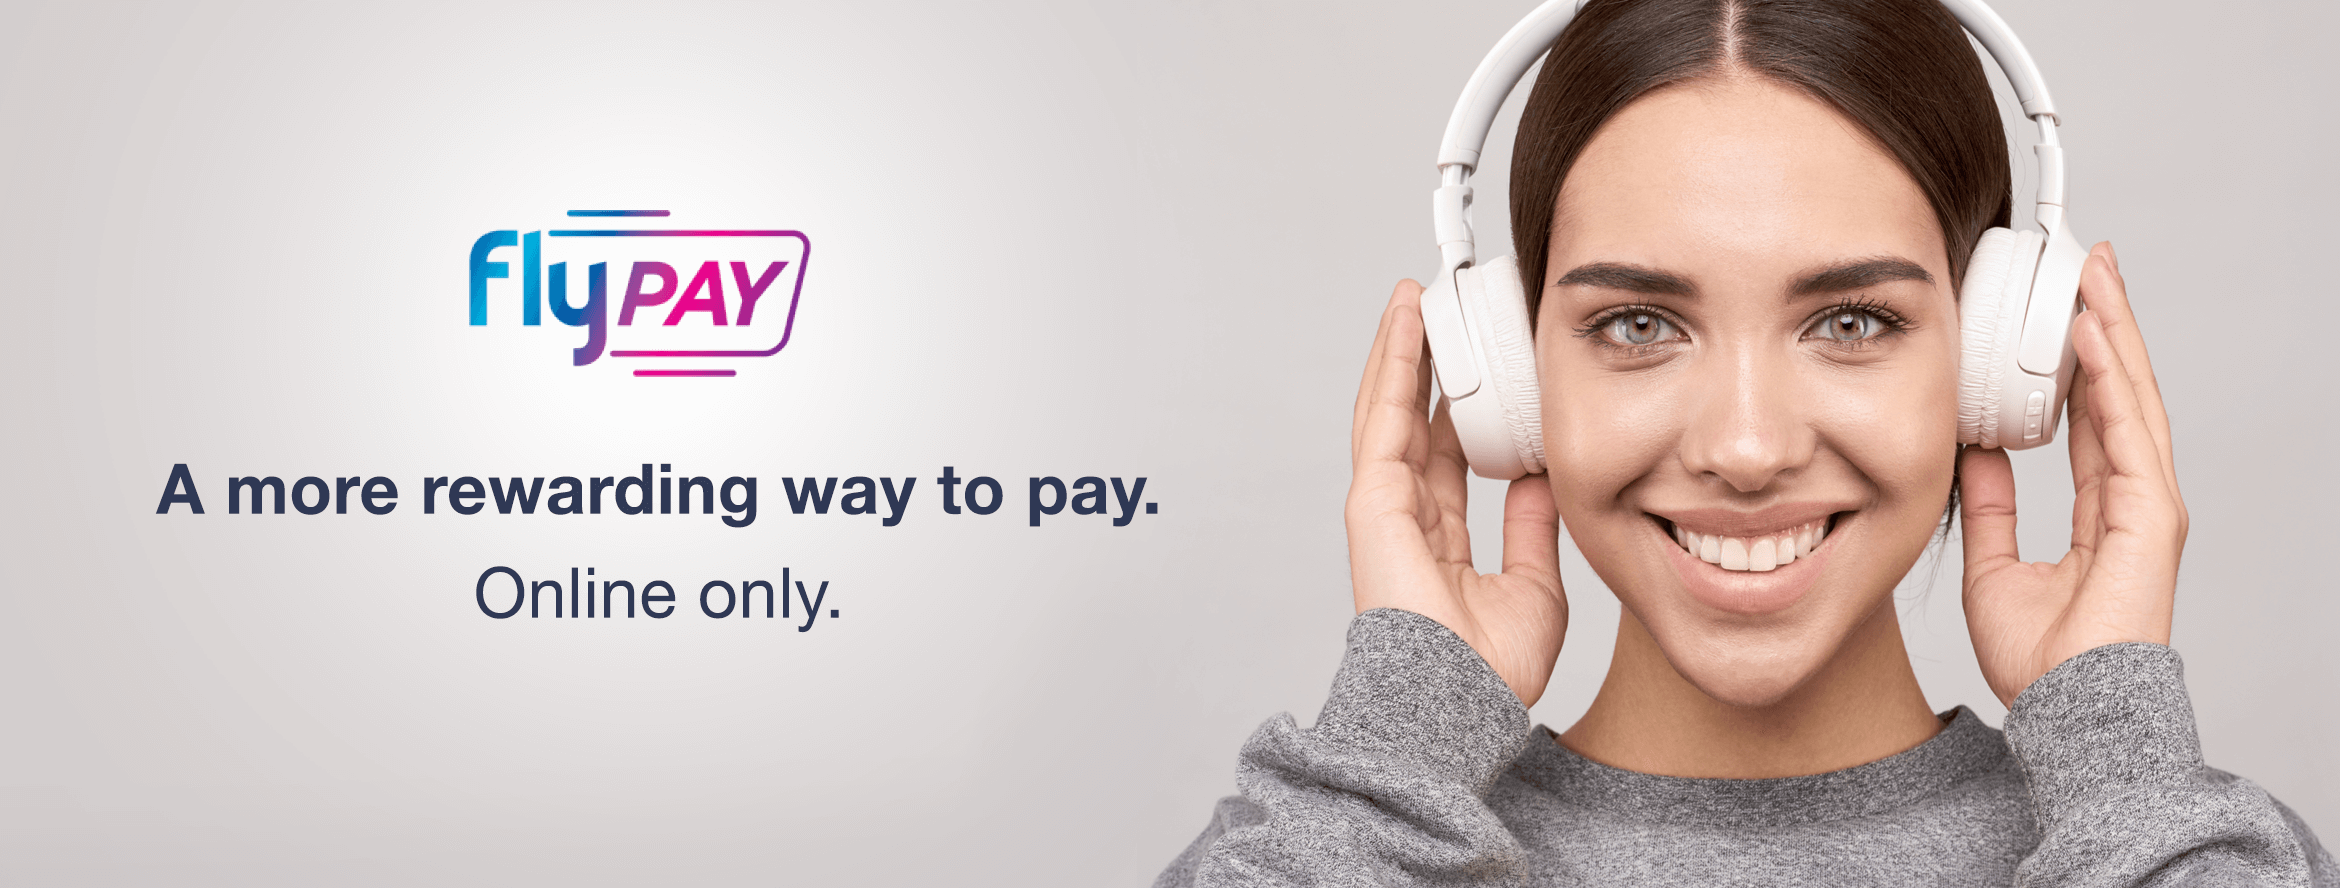 fly pay